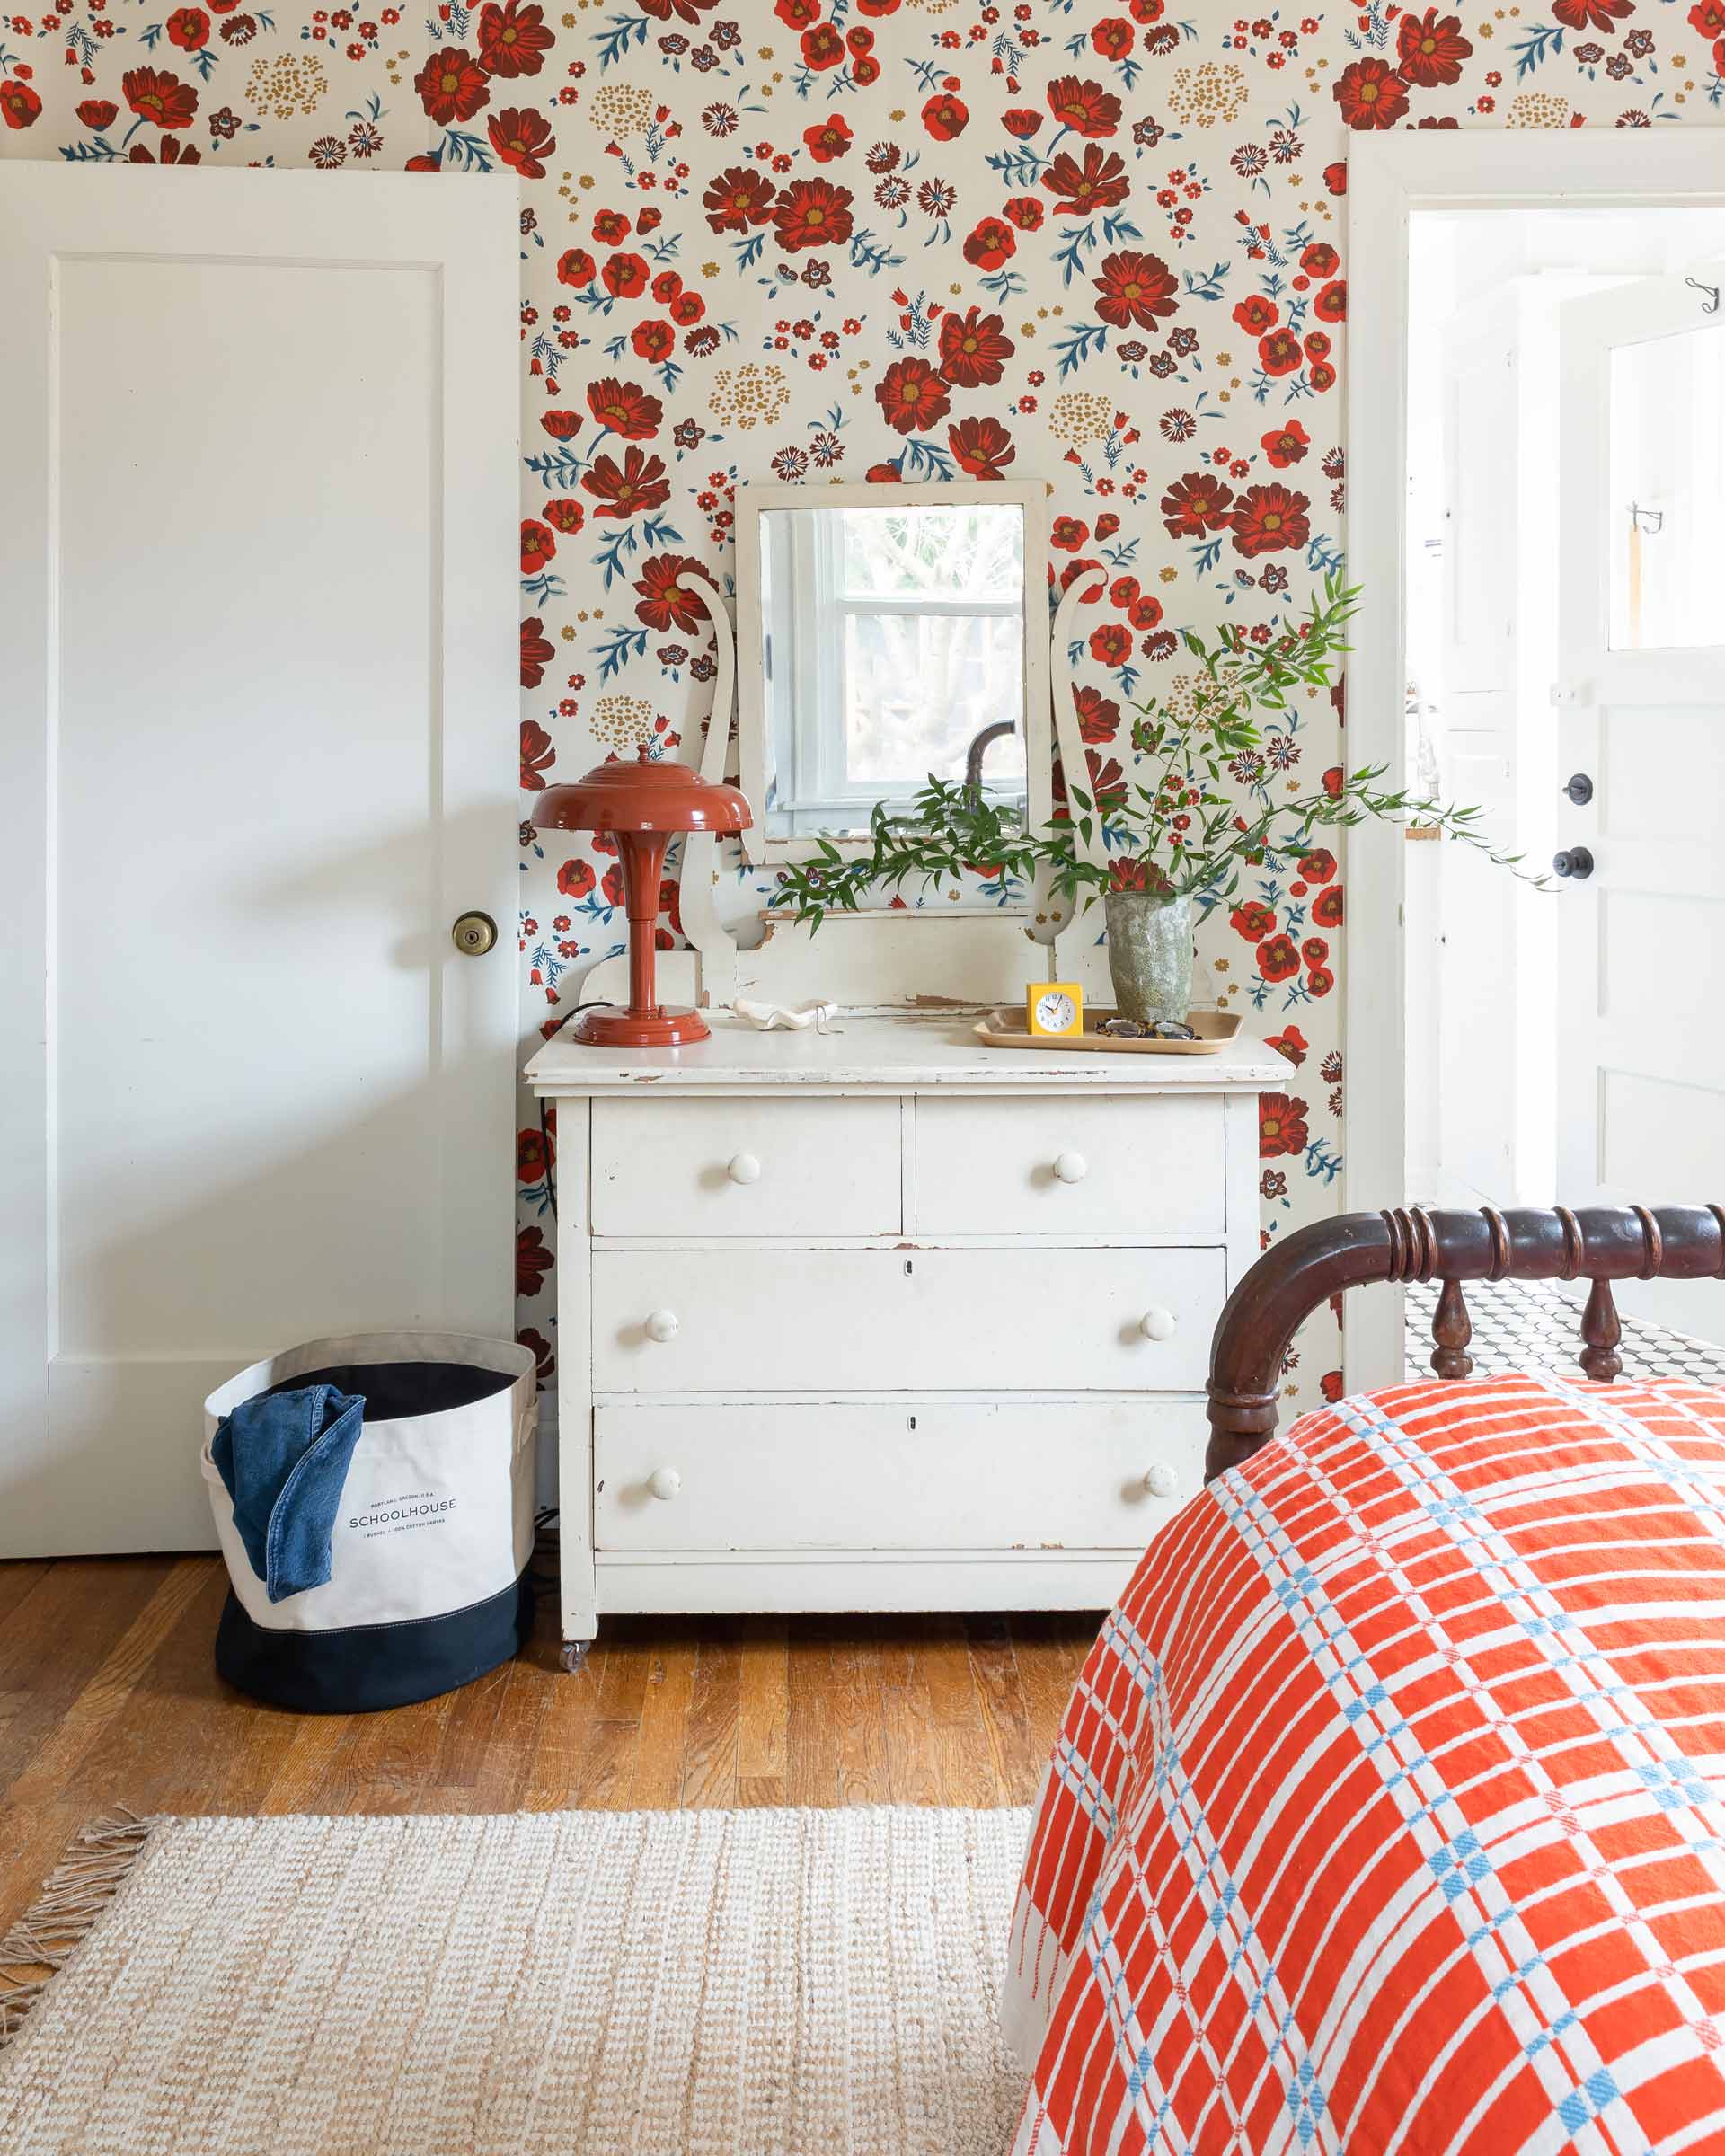 A bold floral wallpaper in the bedroom.